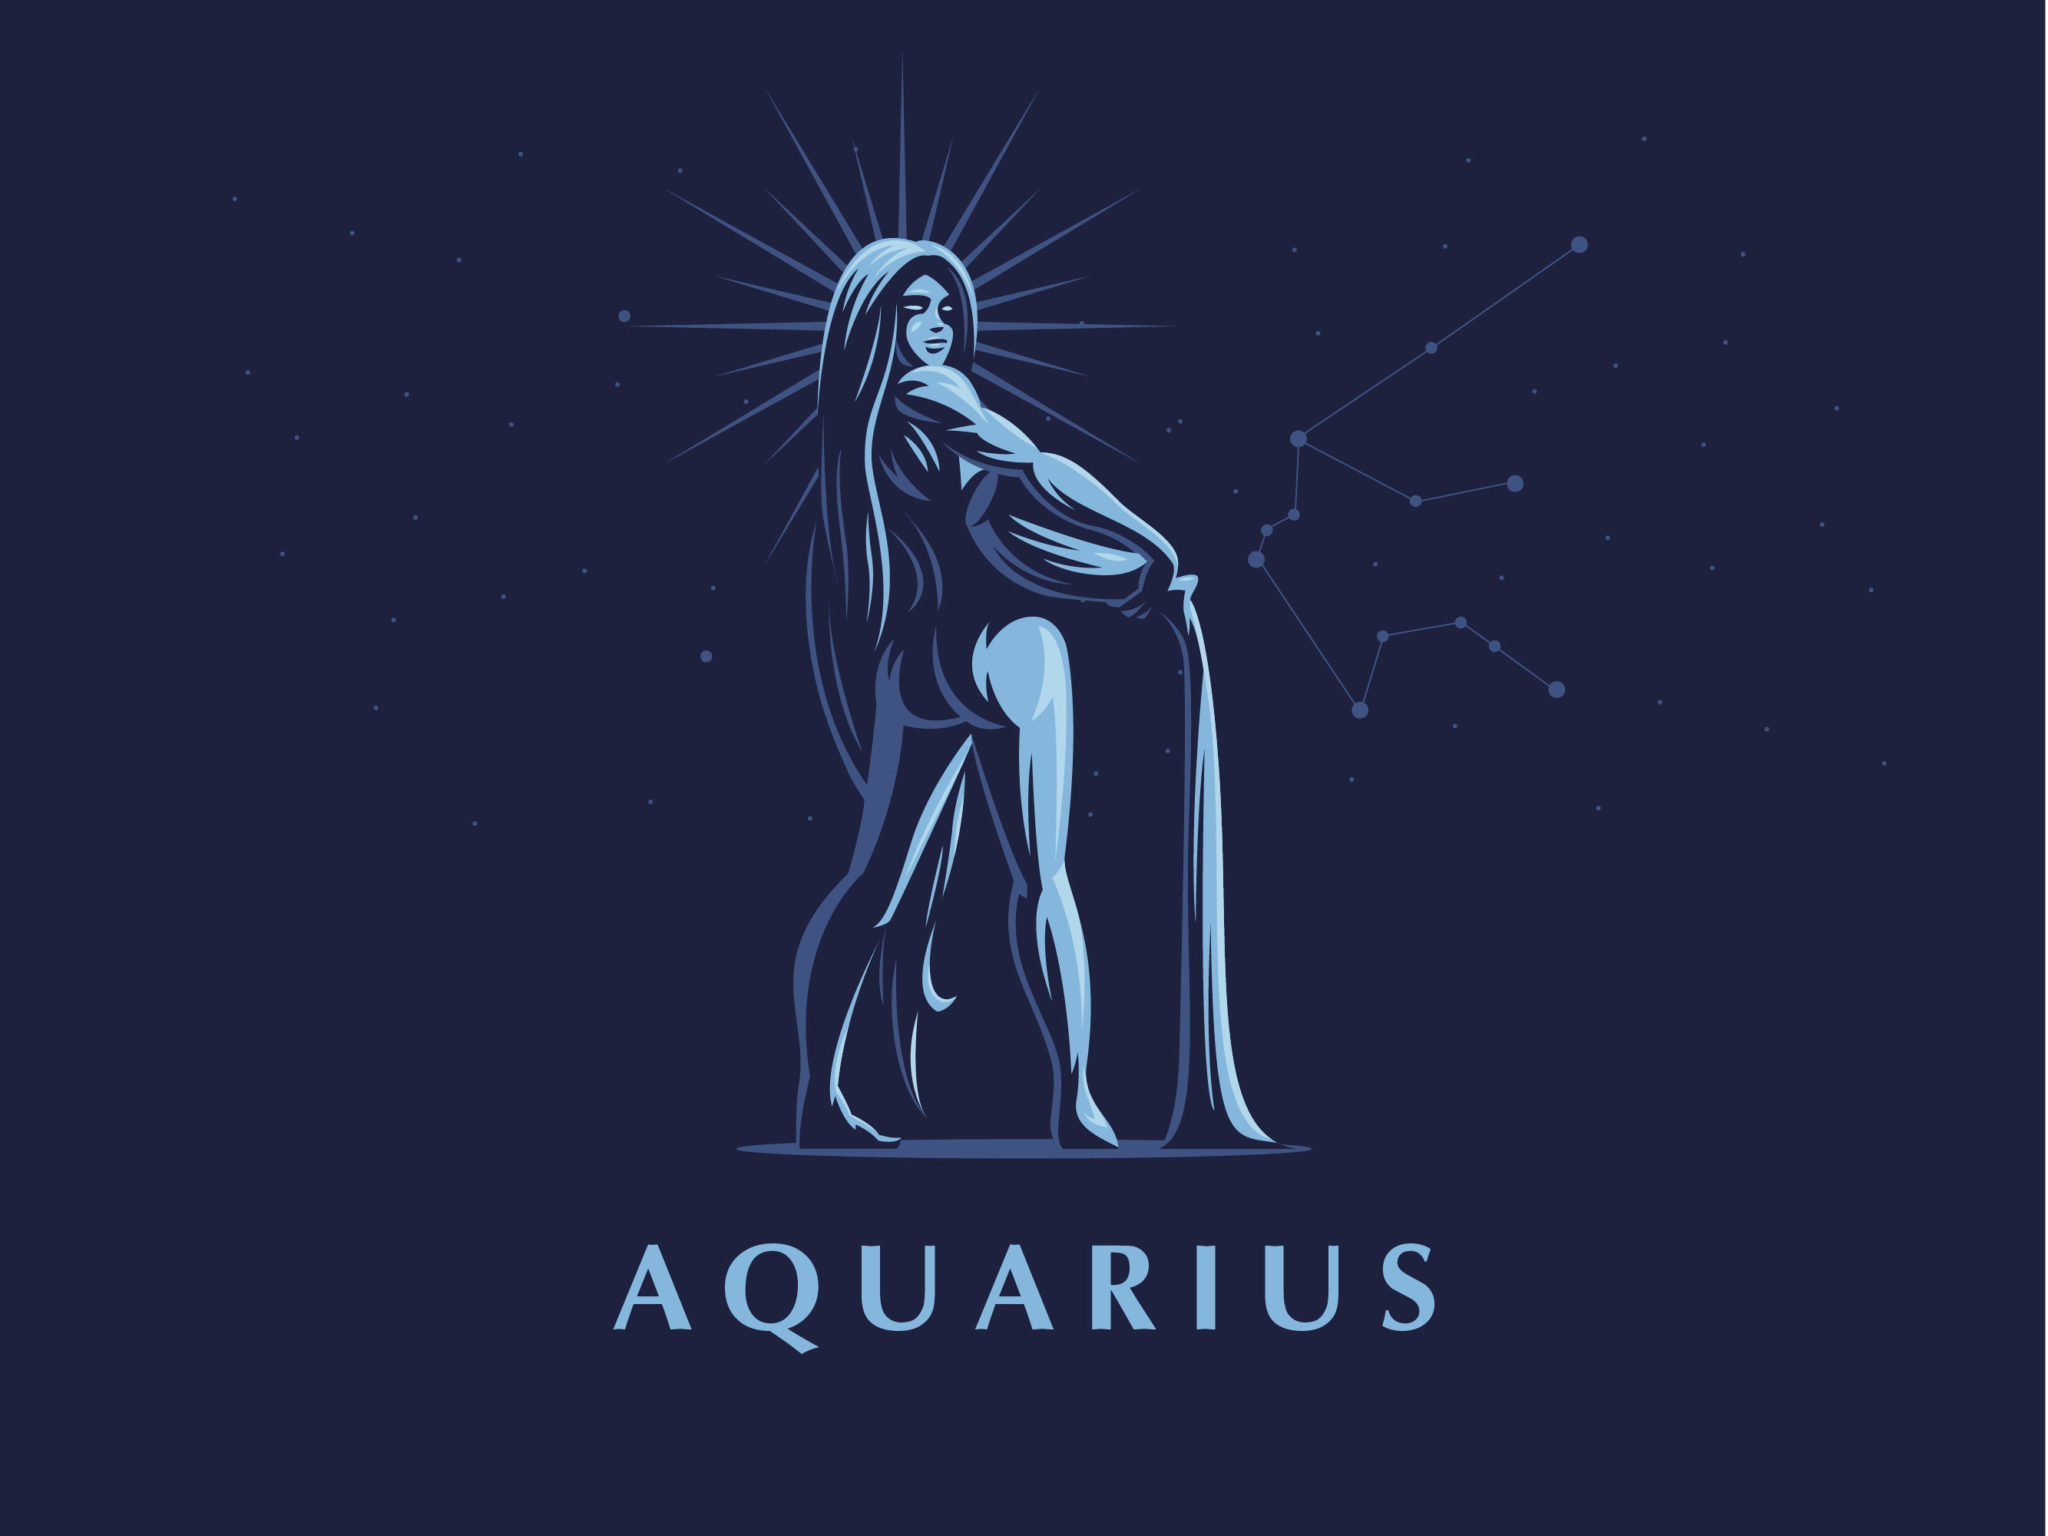 aquarius-horoscope-daily-today-tomorrow-weekly-monthly-yearly.jpg